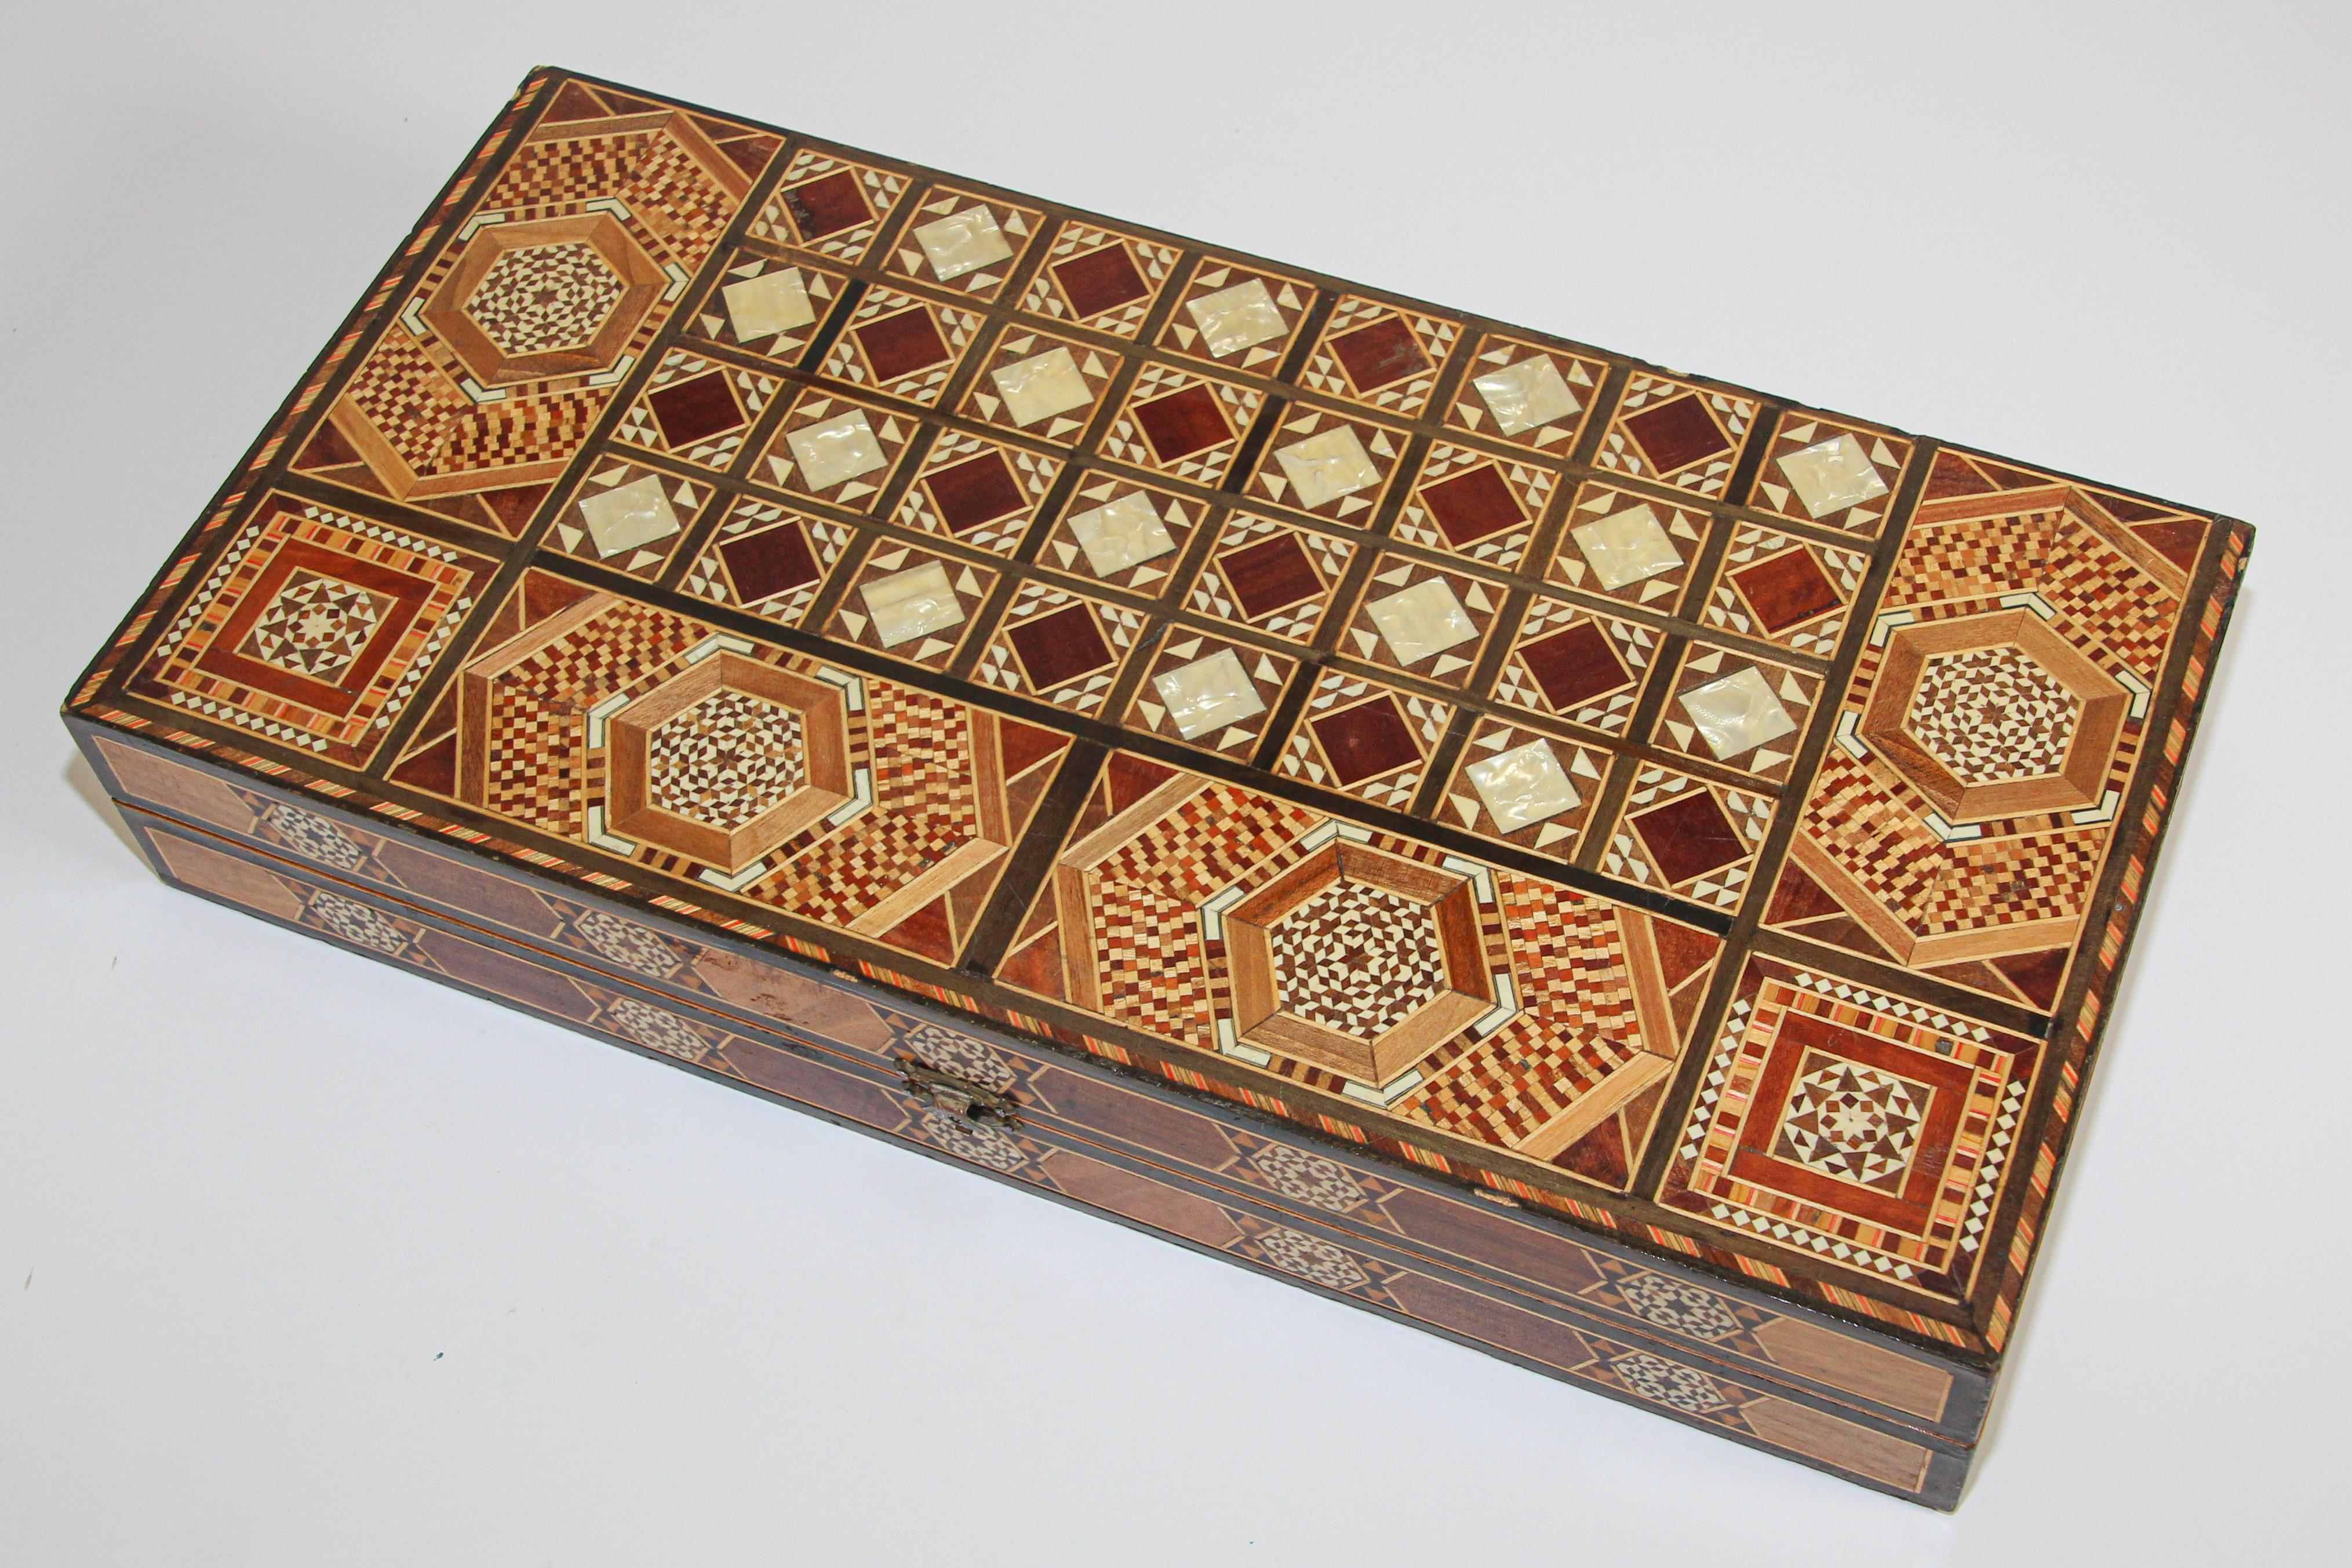 Large vintage midcentury Syrian inlaid with mother of pearl mosaic backgammon game.
Great inlaid micro mosaic hinged marquetry game box features a chess and checker board on the exterior and backgammon board on the interior with all the wooden dice